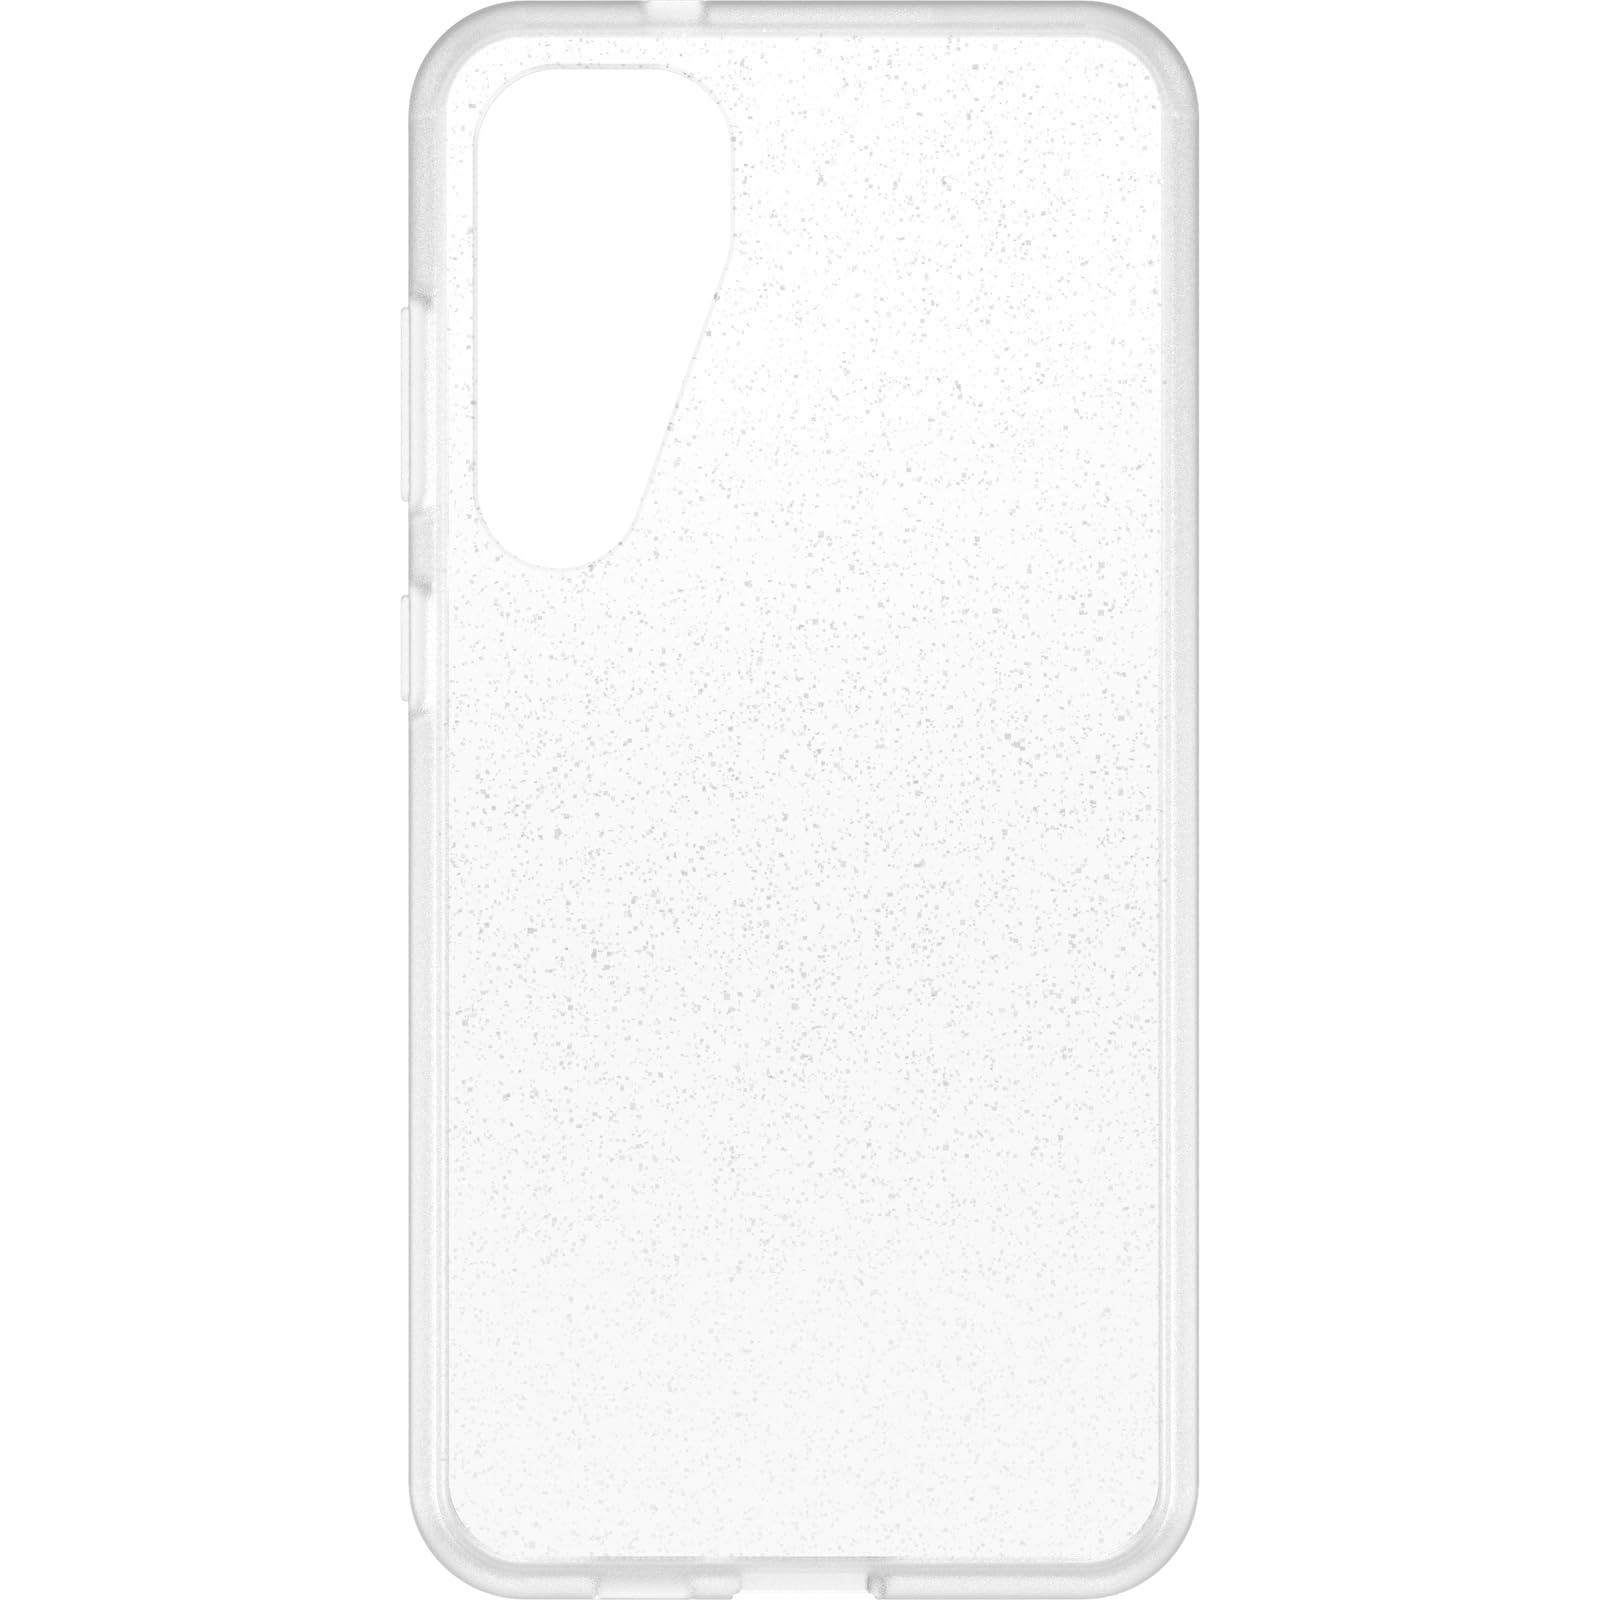 OtterBox Samsung Galaxy S24+ Prefix Series Case - Stardust (Clear/Glitter), Ultra-Thin, Pocket-Friendly, Raised Edges Protect Camera & Screen, Wireless Charging Compatible